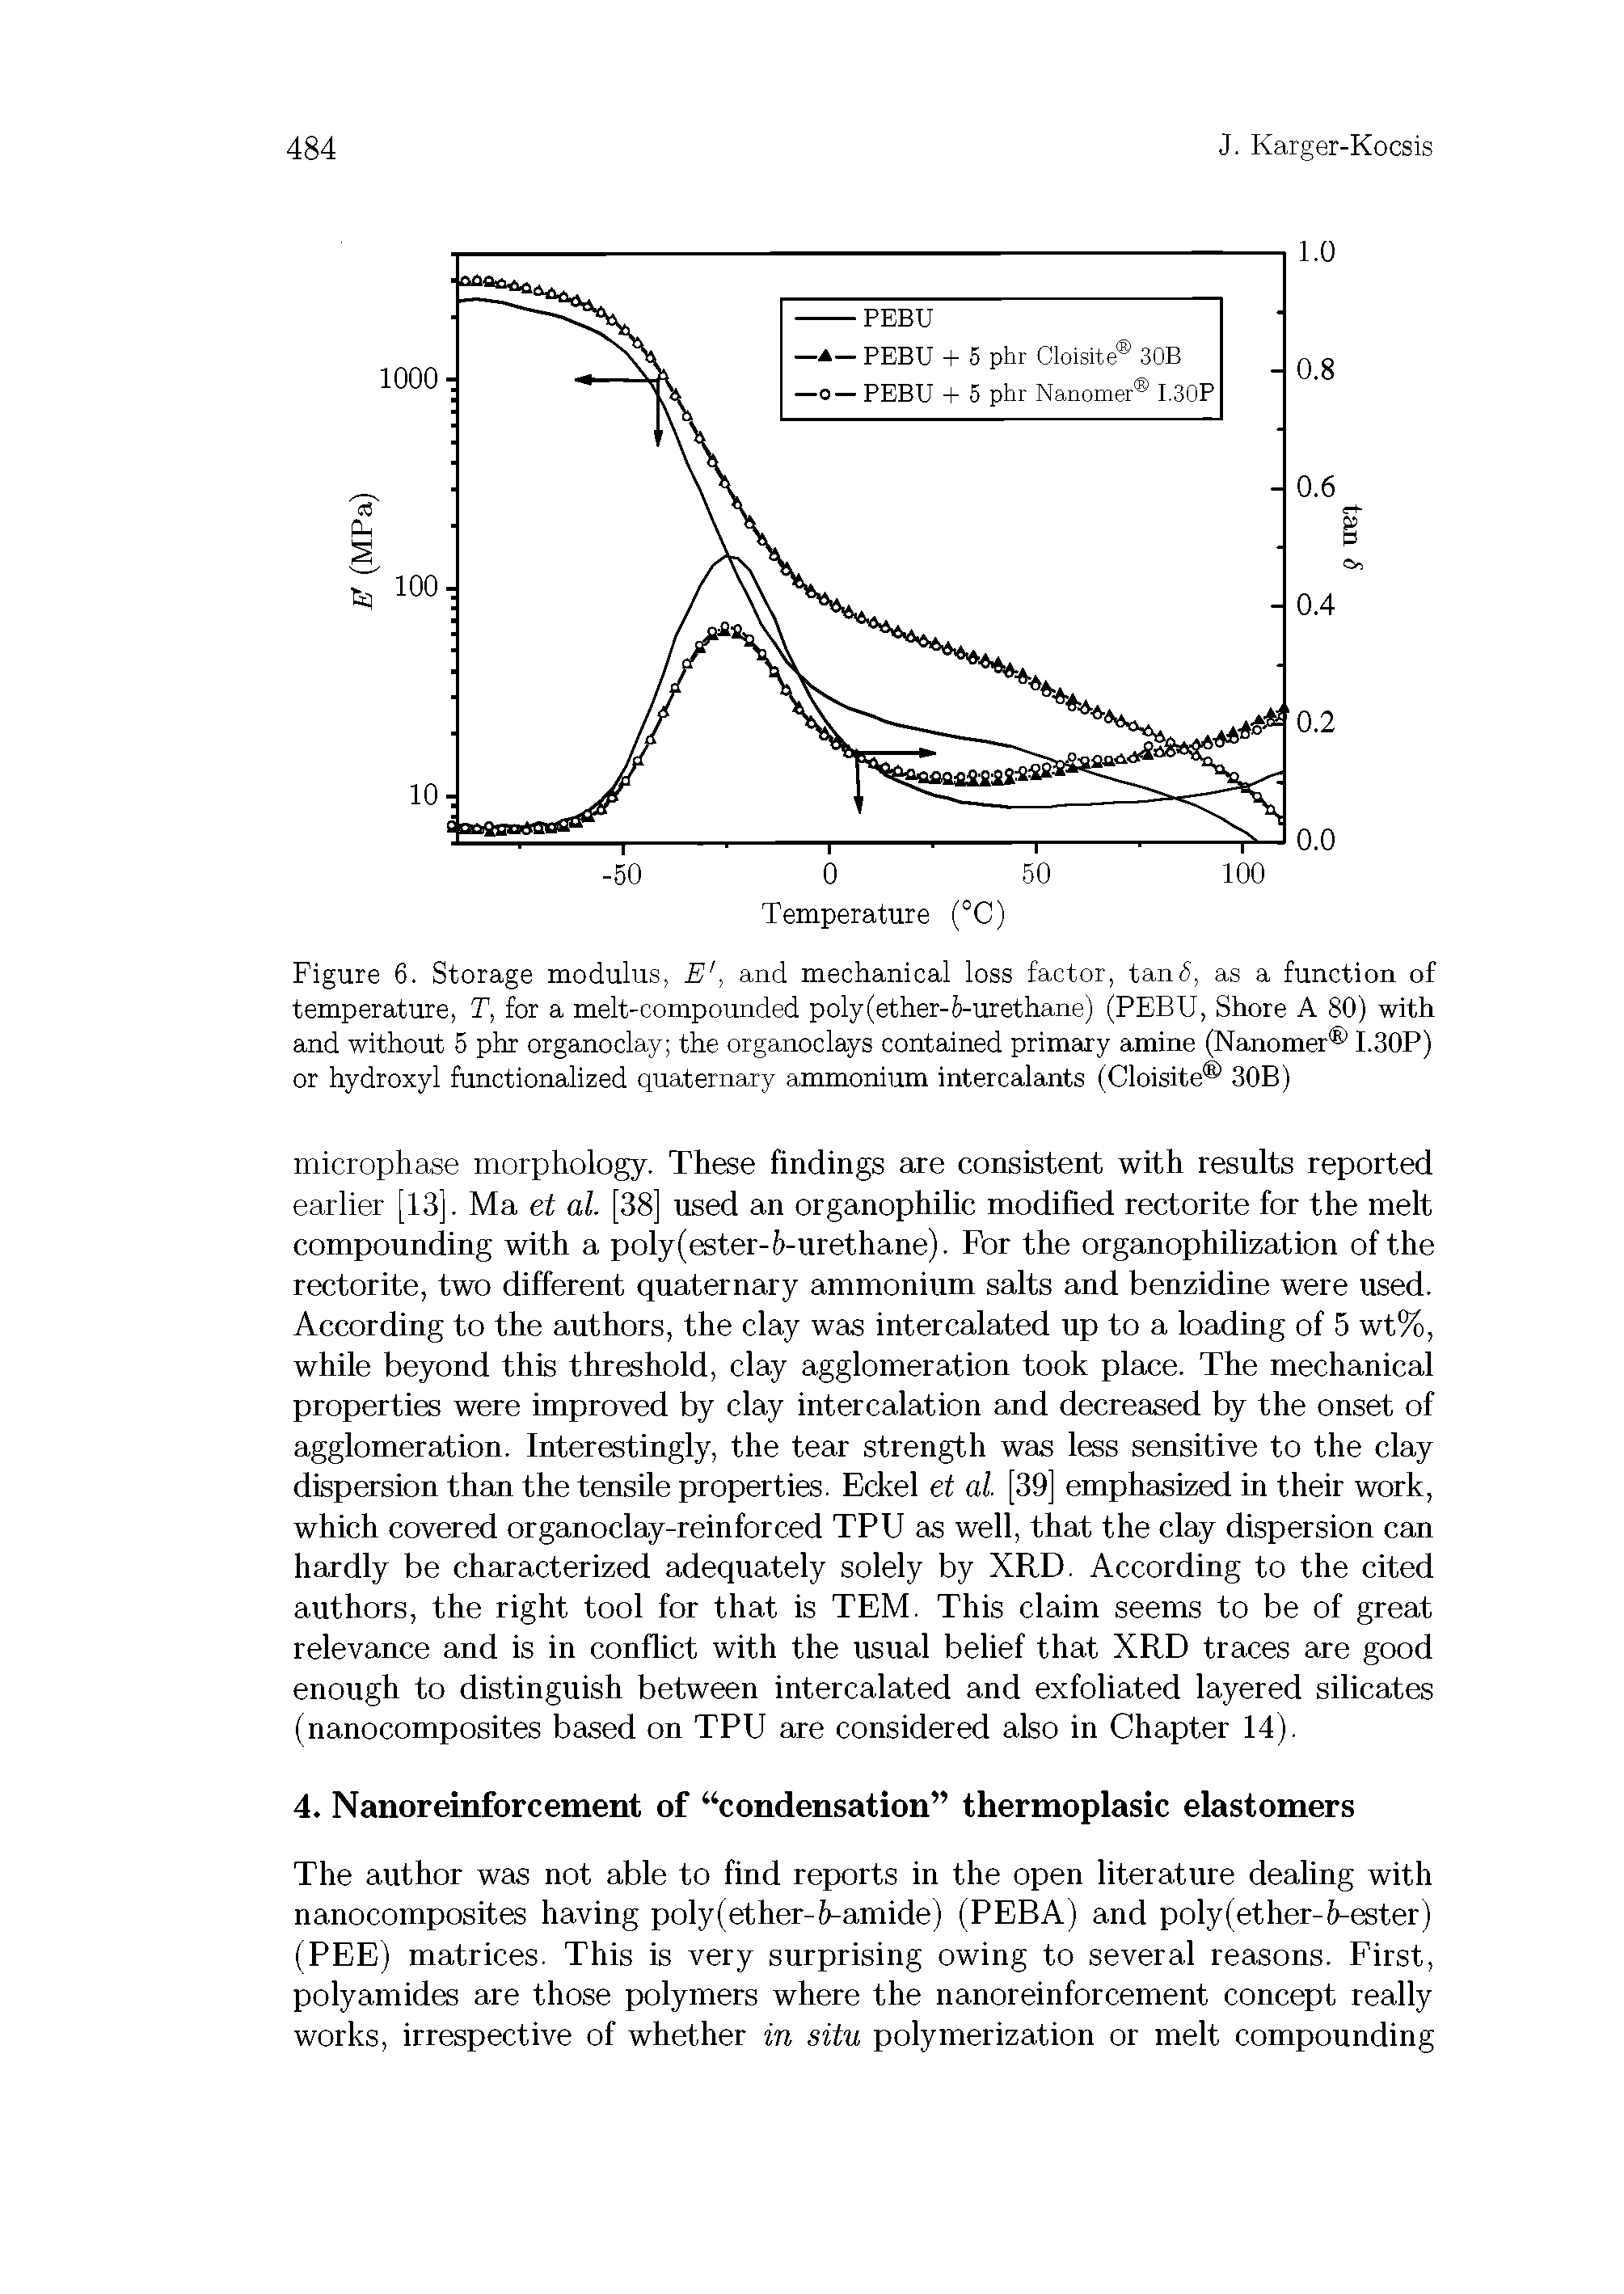 Figure 6. Storage modulus, E and mechanical loss factor, tan, as a function of temperature, T, for a melt-compounded poly (ether-6-urethane) (PEBU, Shore A 80) with and without 5 phr organoclay the organoclays contained primary amine (Nanomer I.30P) or hydroxyl functionalized quaternary ammonium intercaJants (Cloisite 30B)...